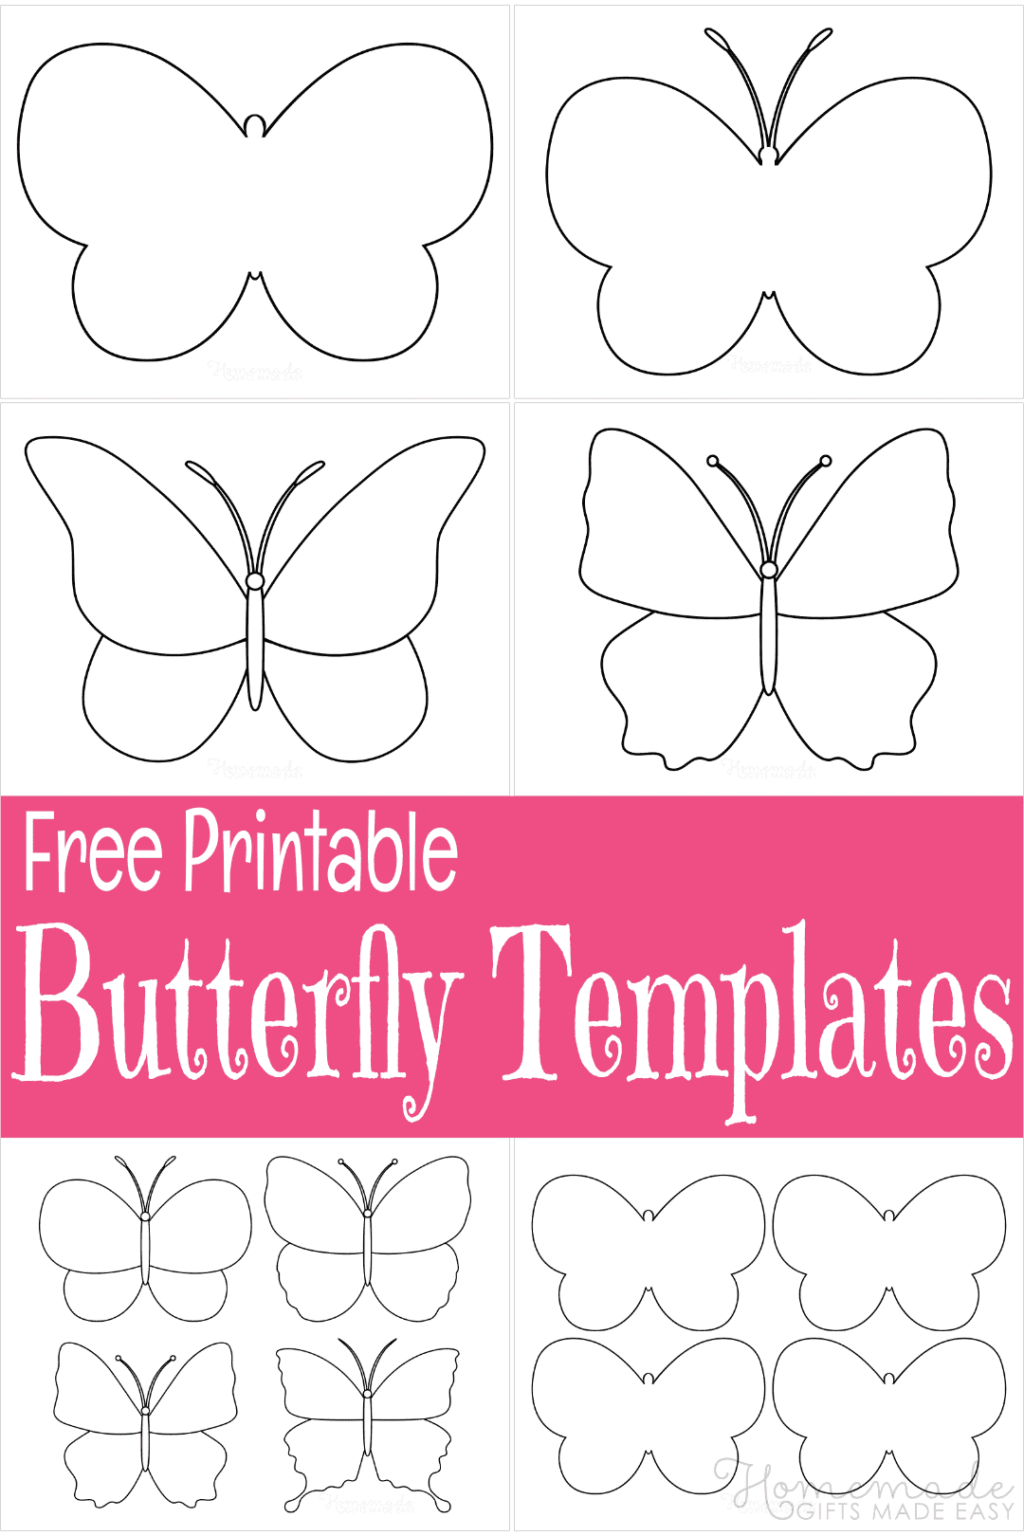 free-printable-butterfly-templates-fillable-form-2023